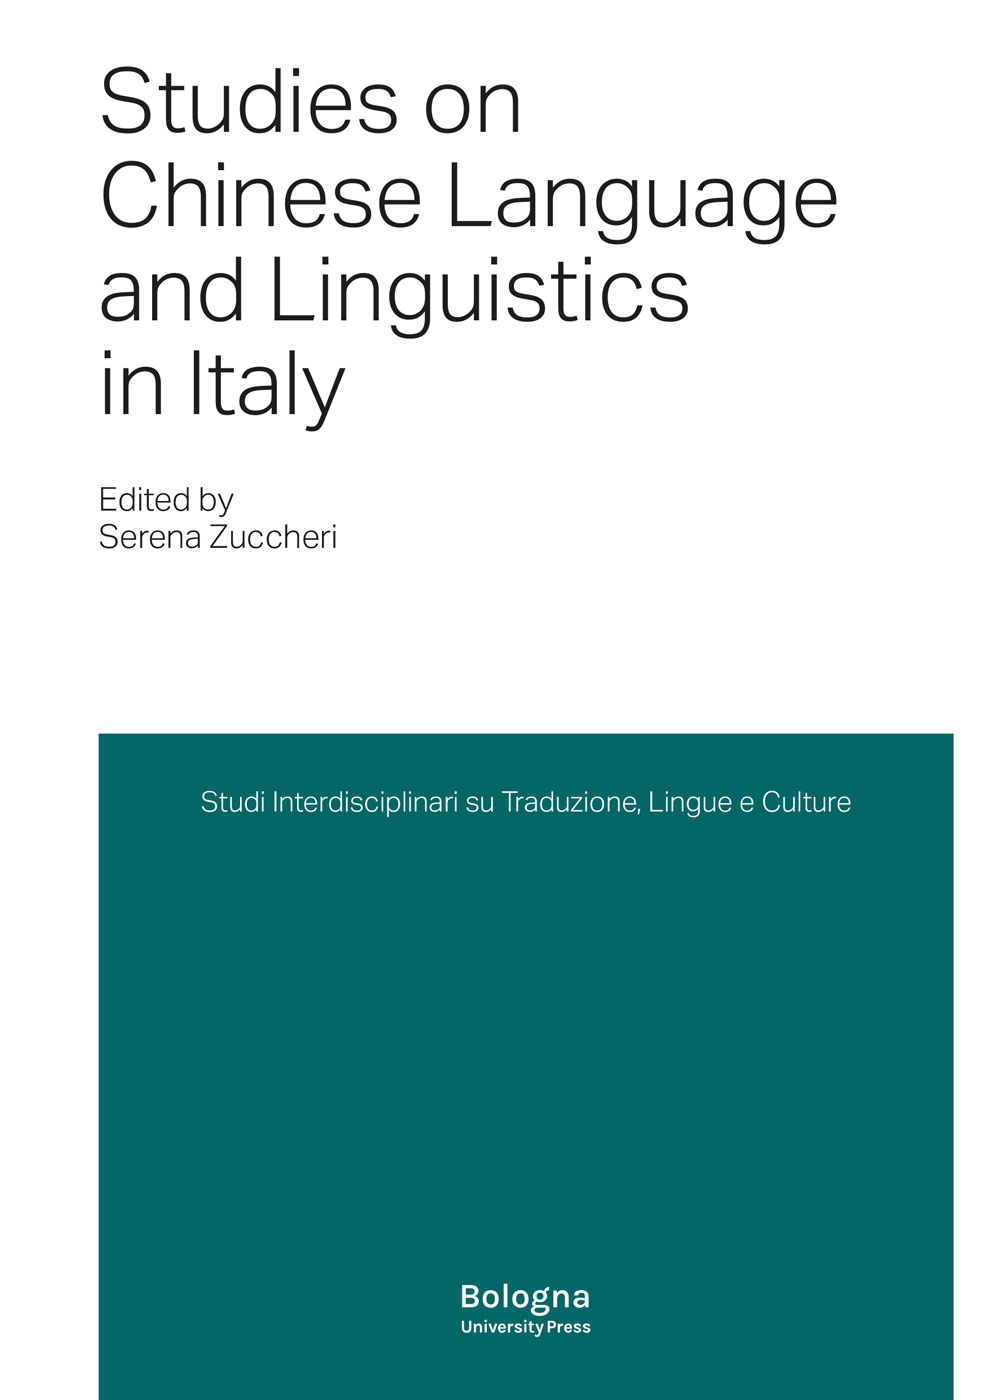 Studies on Chinese Language and Linguistics in Italy - Bologna University Press